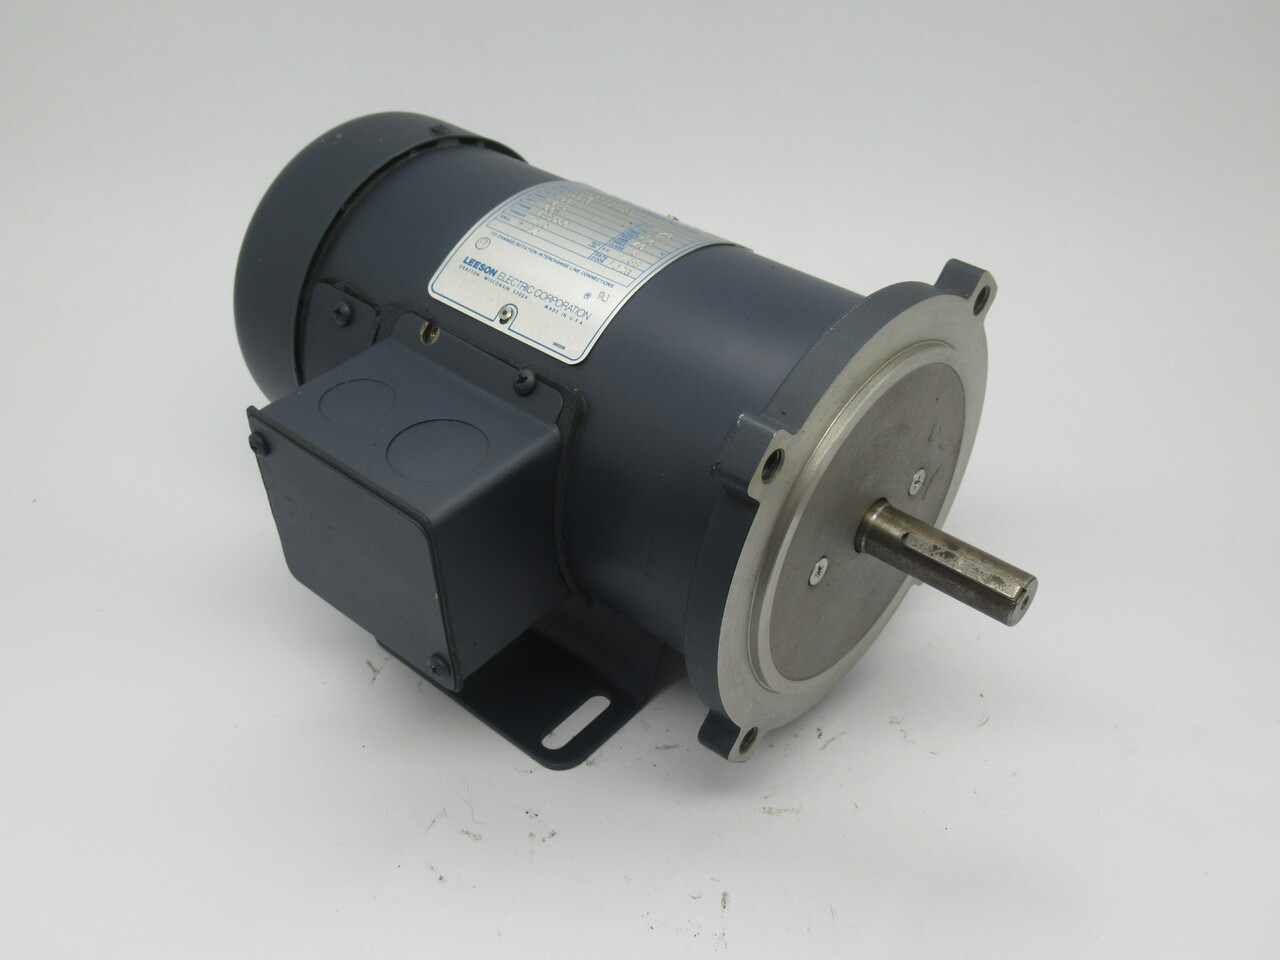 Leeson DC Permanent Magnet Motor 12lb-in 1/3HP 1750RPM 90V MSS56C TEFC 3.5A USED